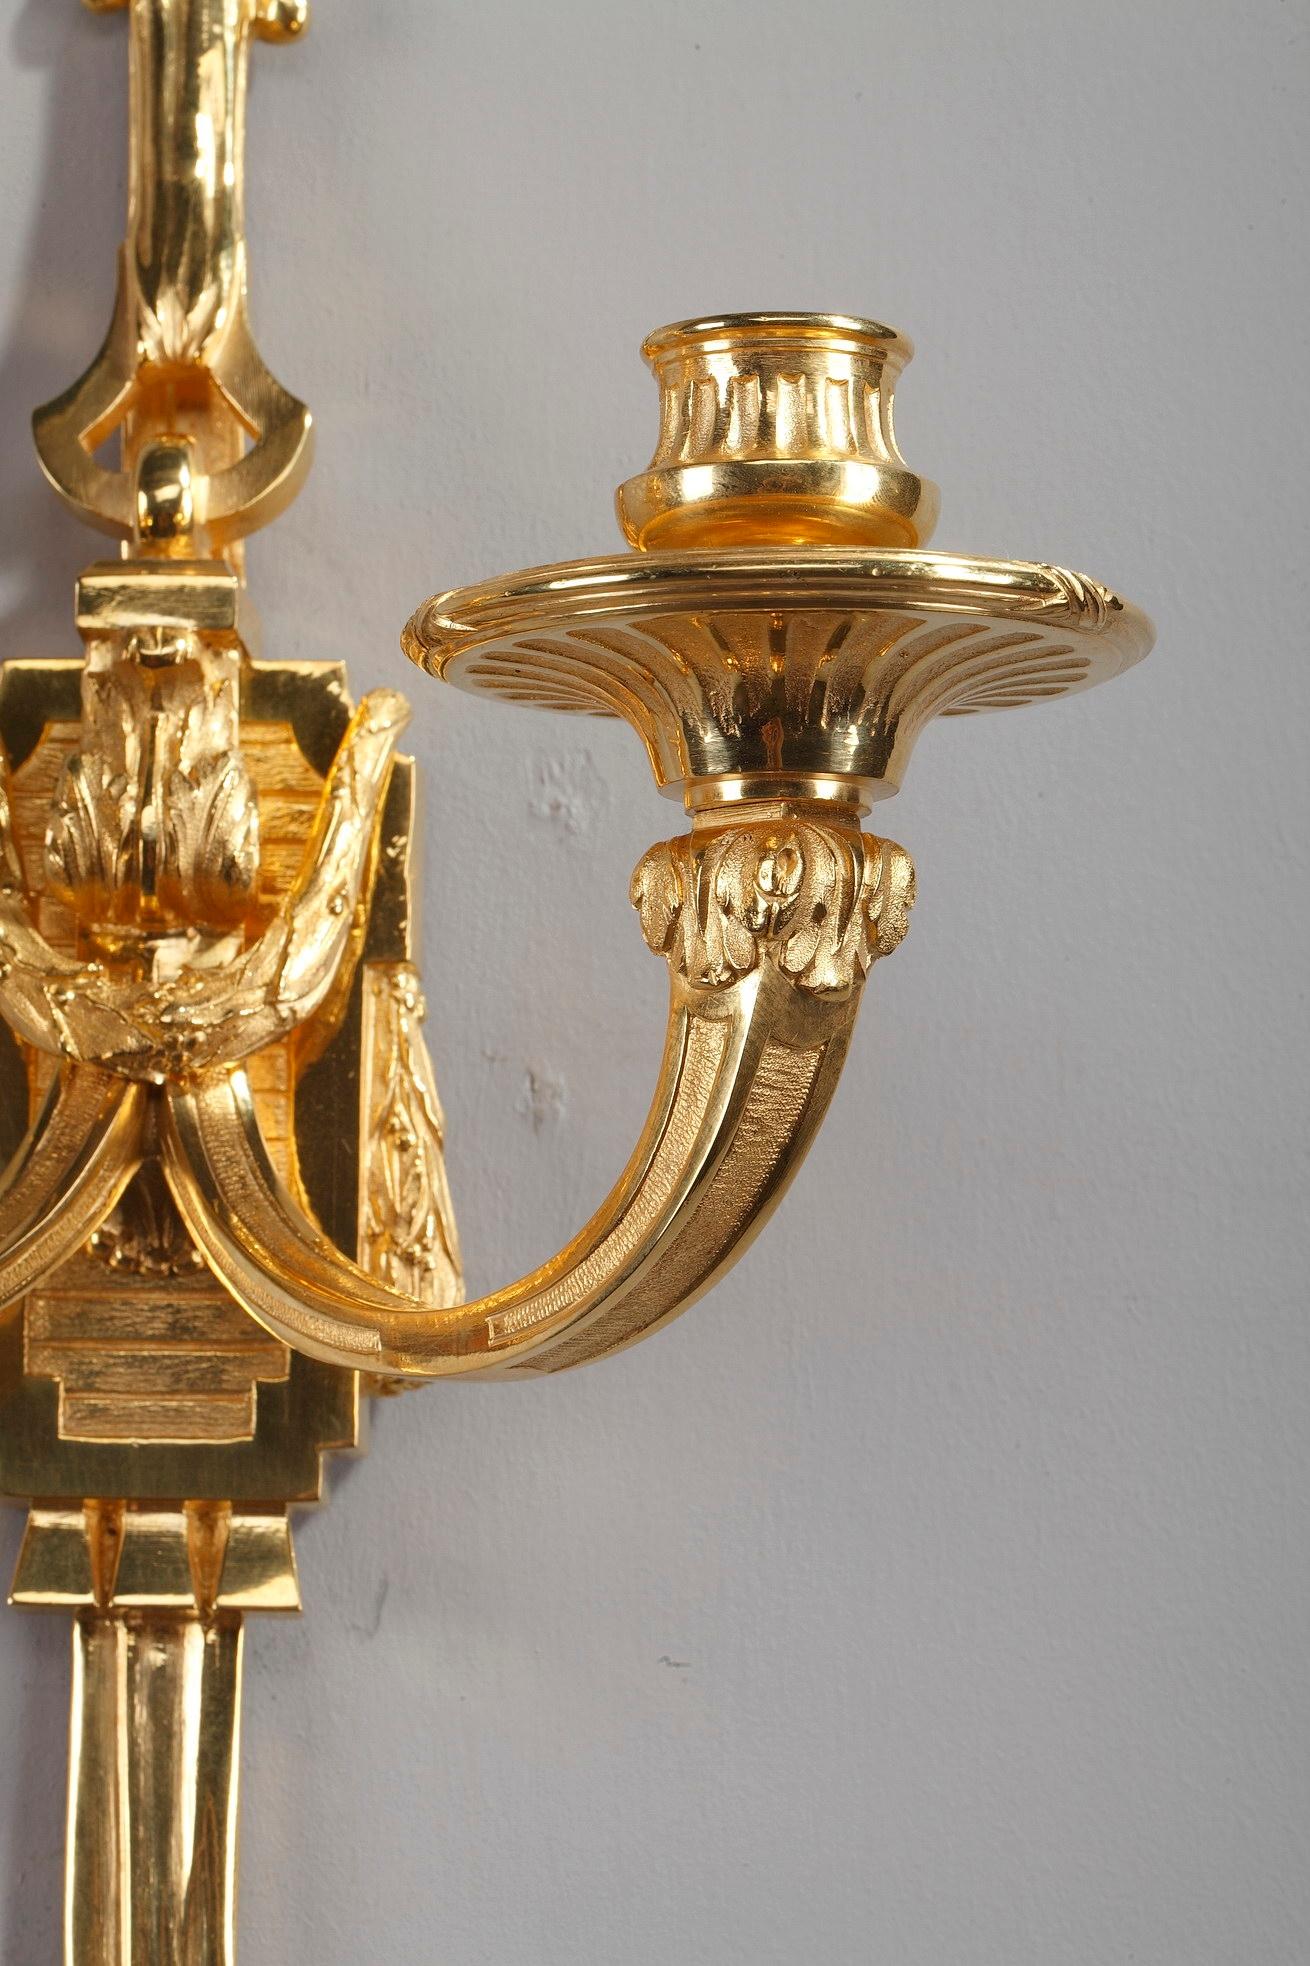 Ormolu Late 19th Century Antique Candle Wall Sconces in Louis XVI Style